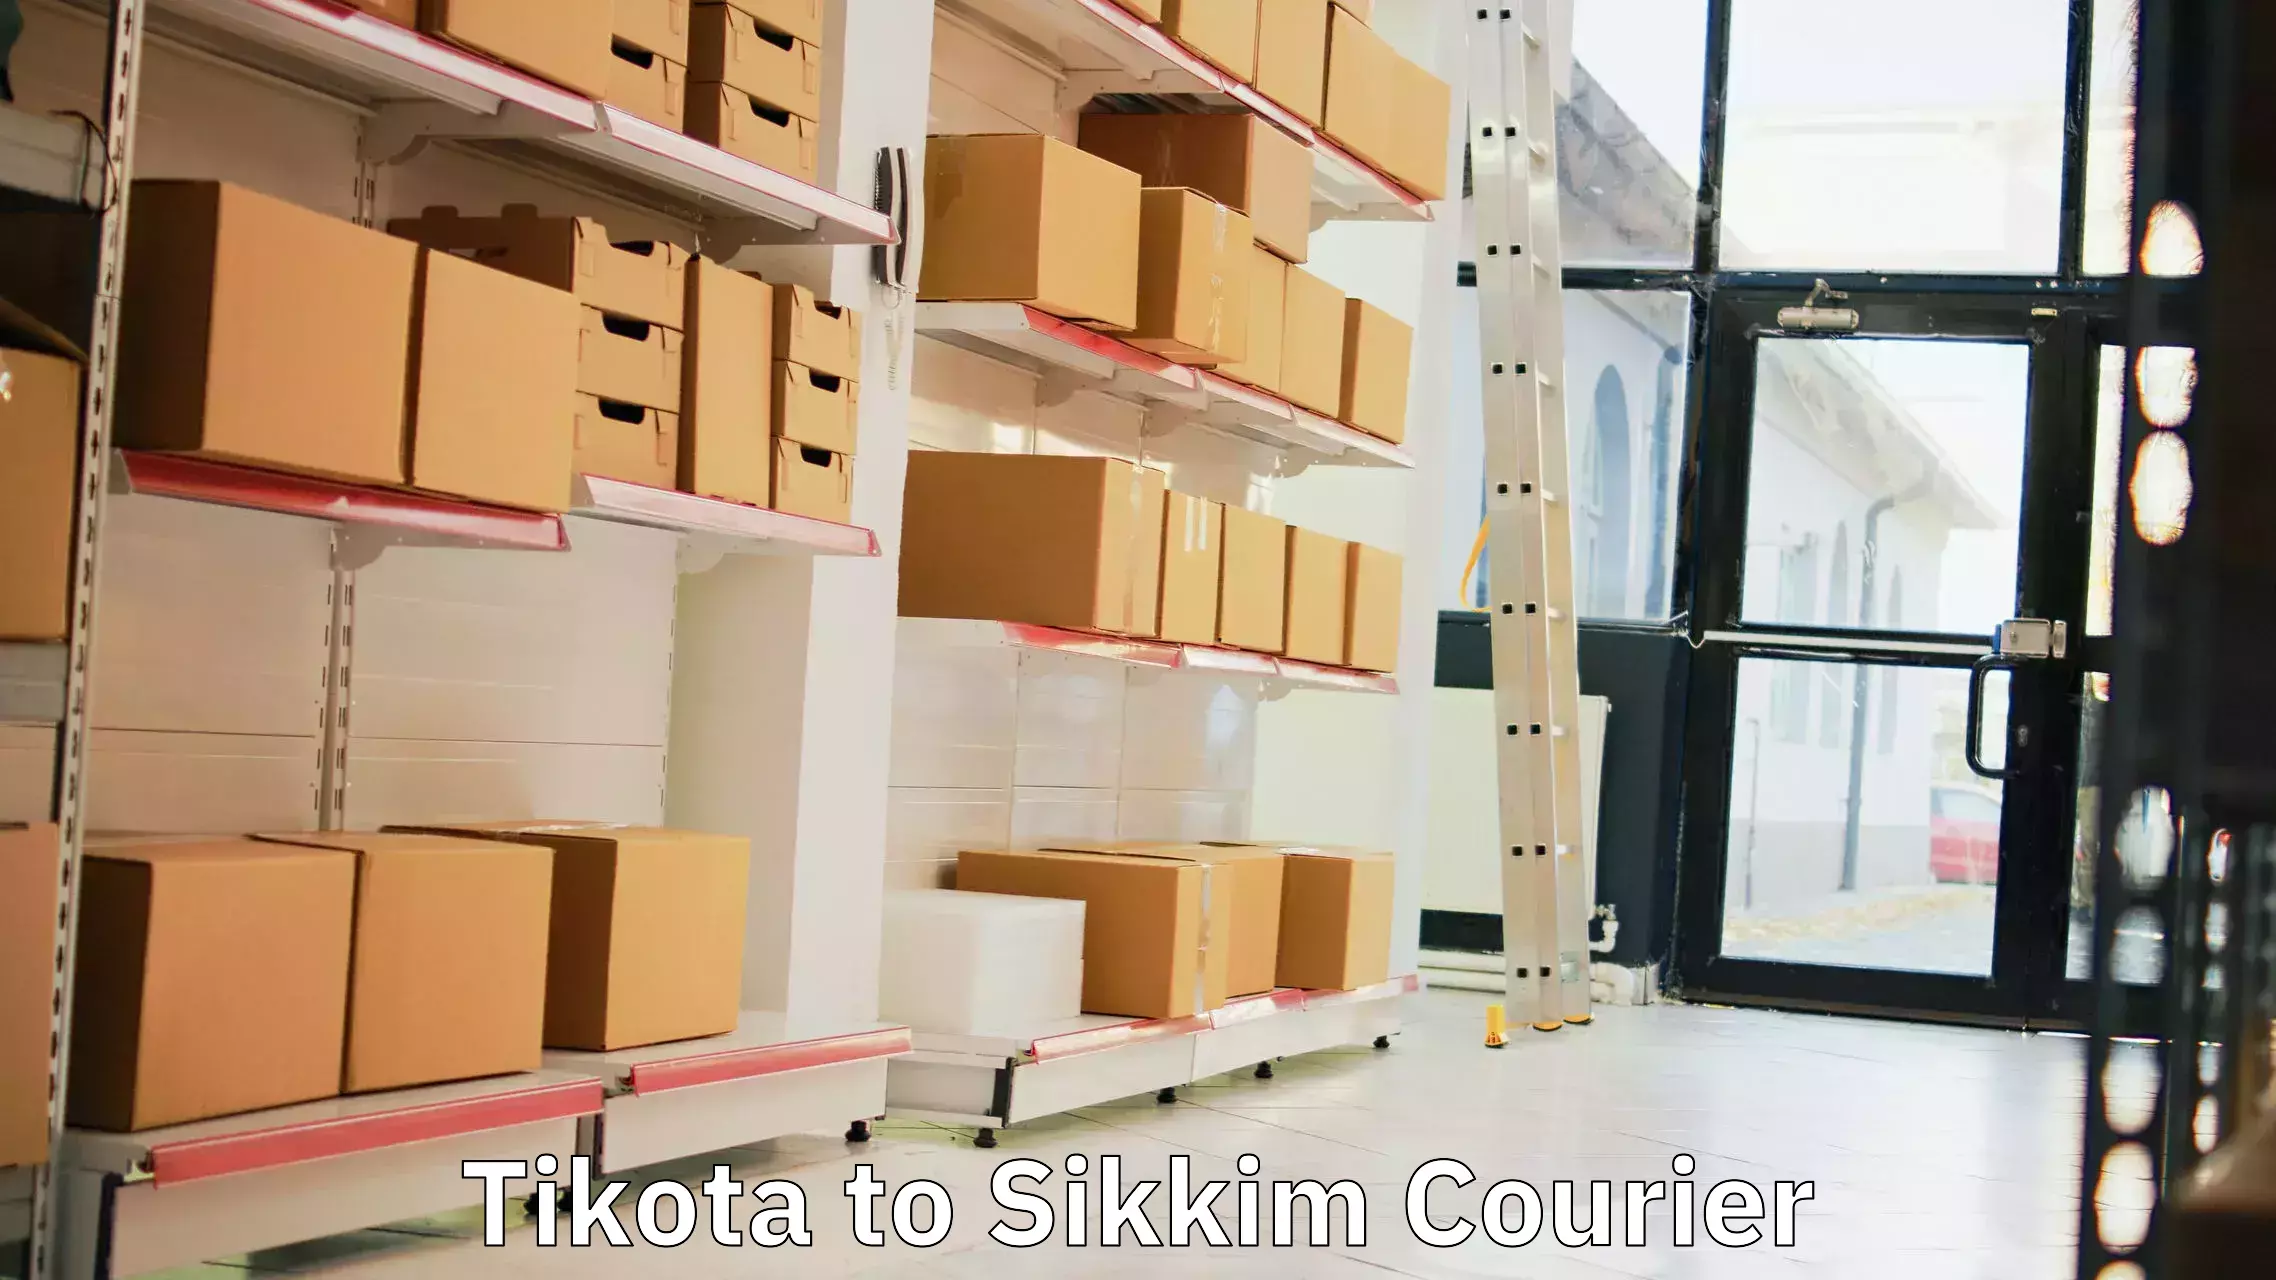 Nationwide parcel services Tikota to Sikkim